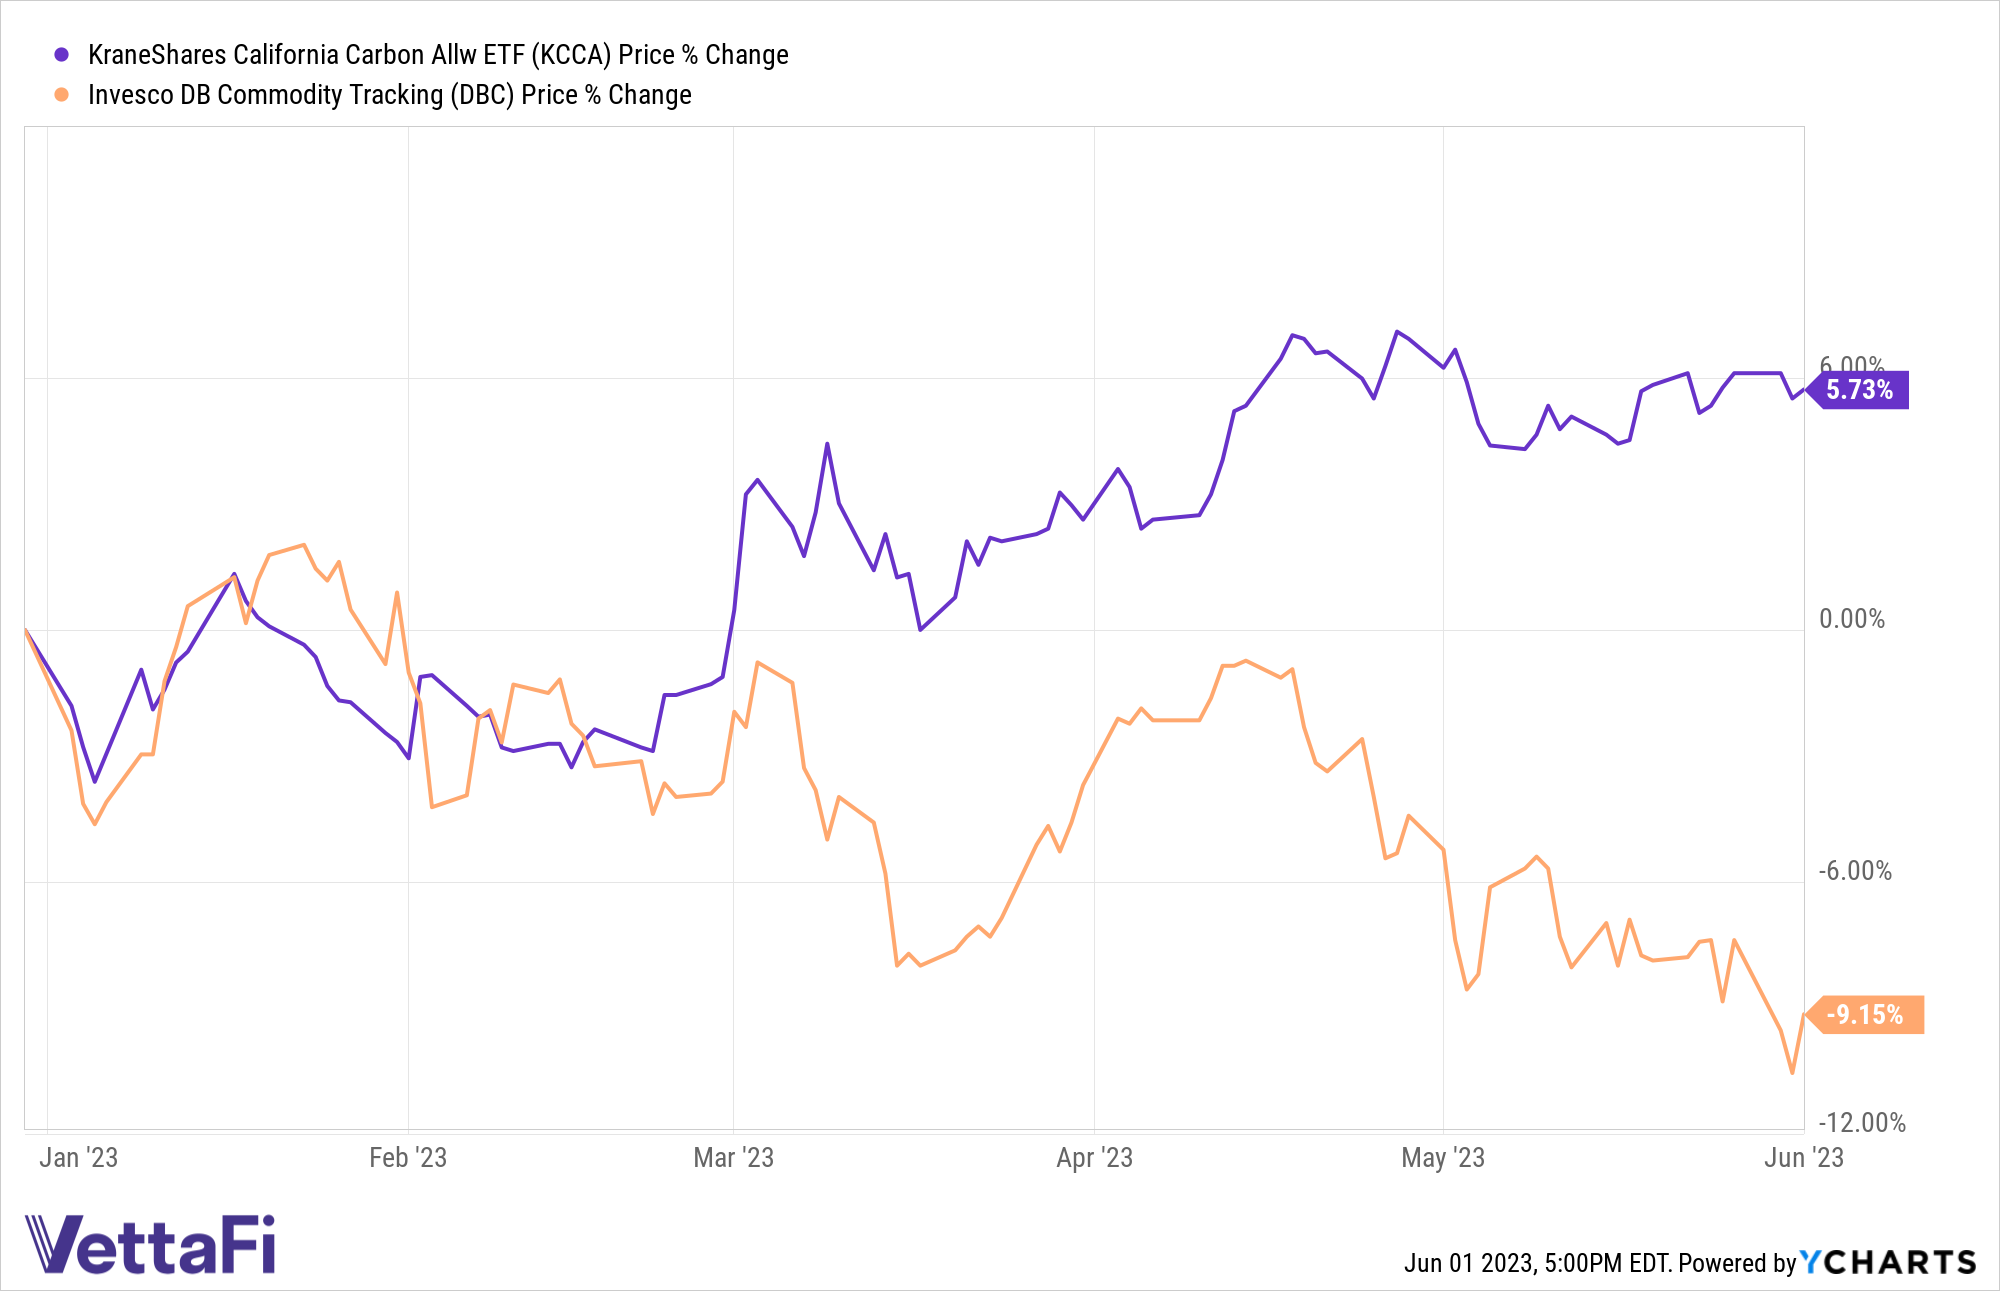 Graph of YTD performance for KCCA (up 5.73%) and DBC (down 9.15%).